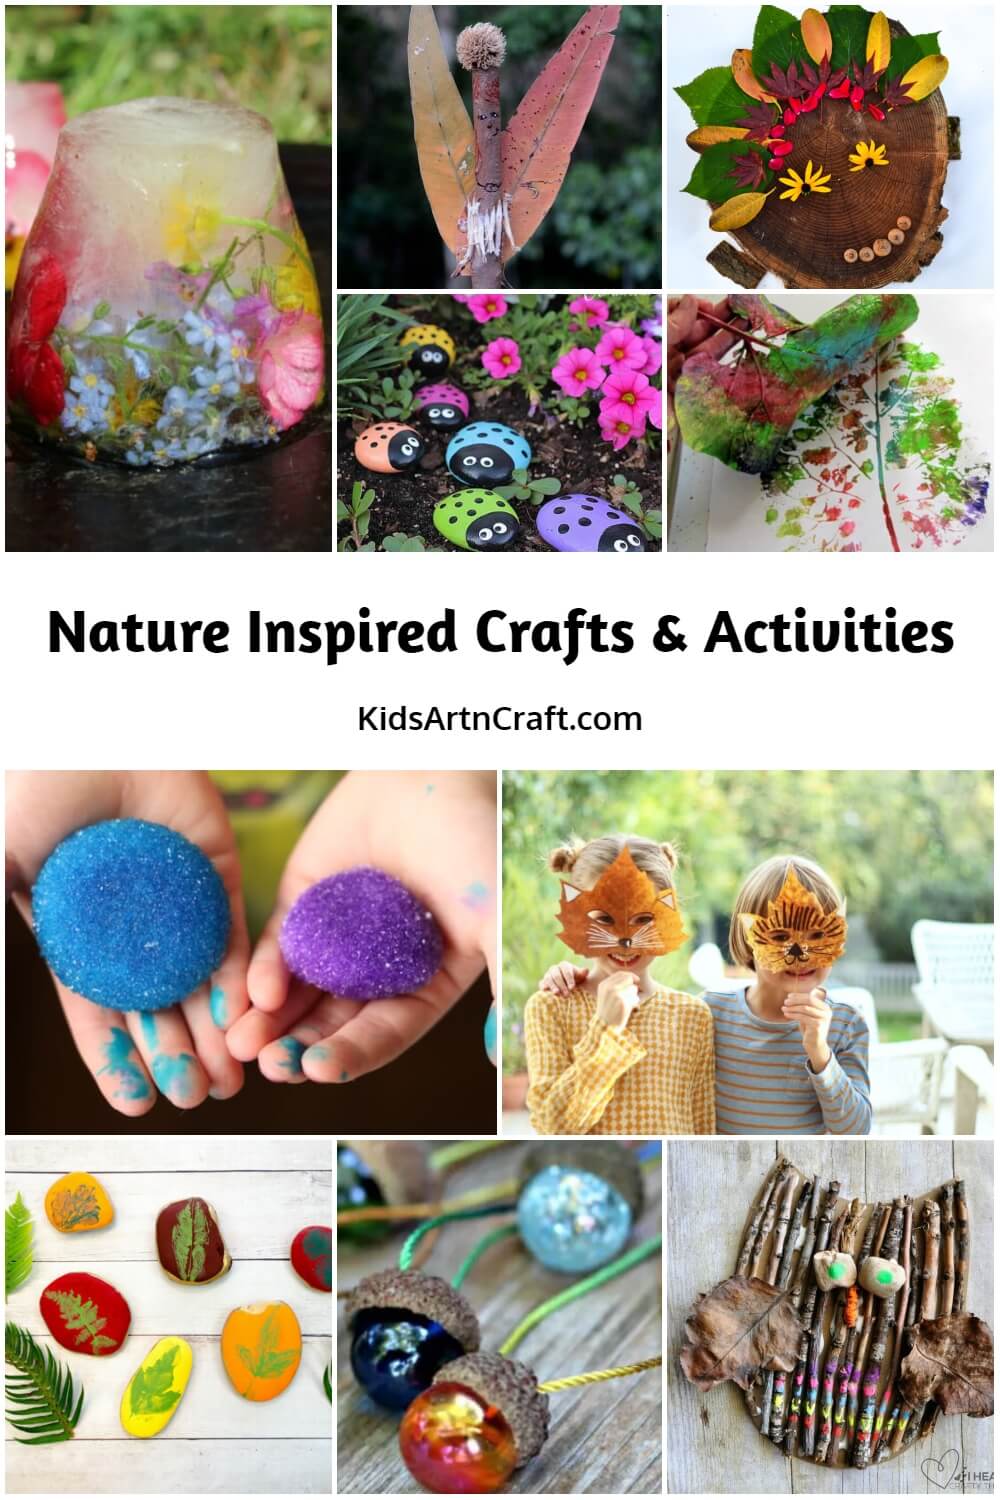 Nature Inspired Crafts and Activities